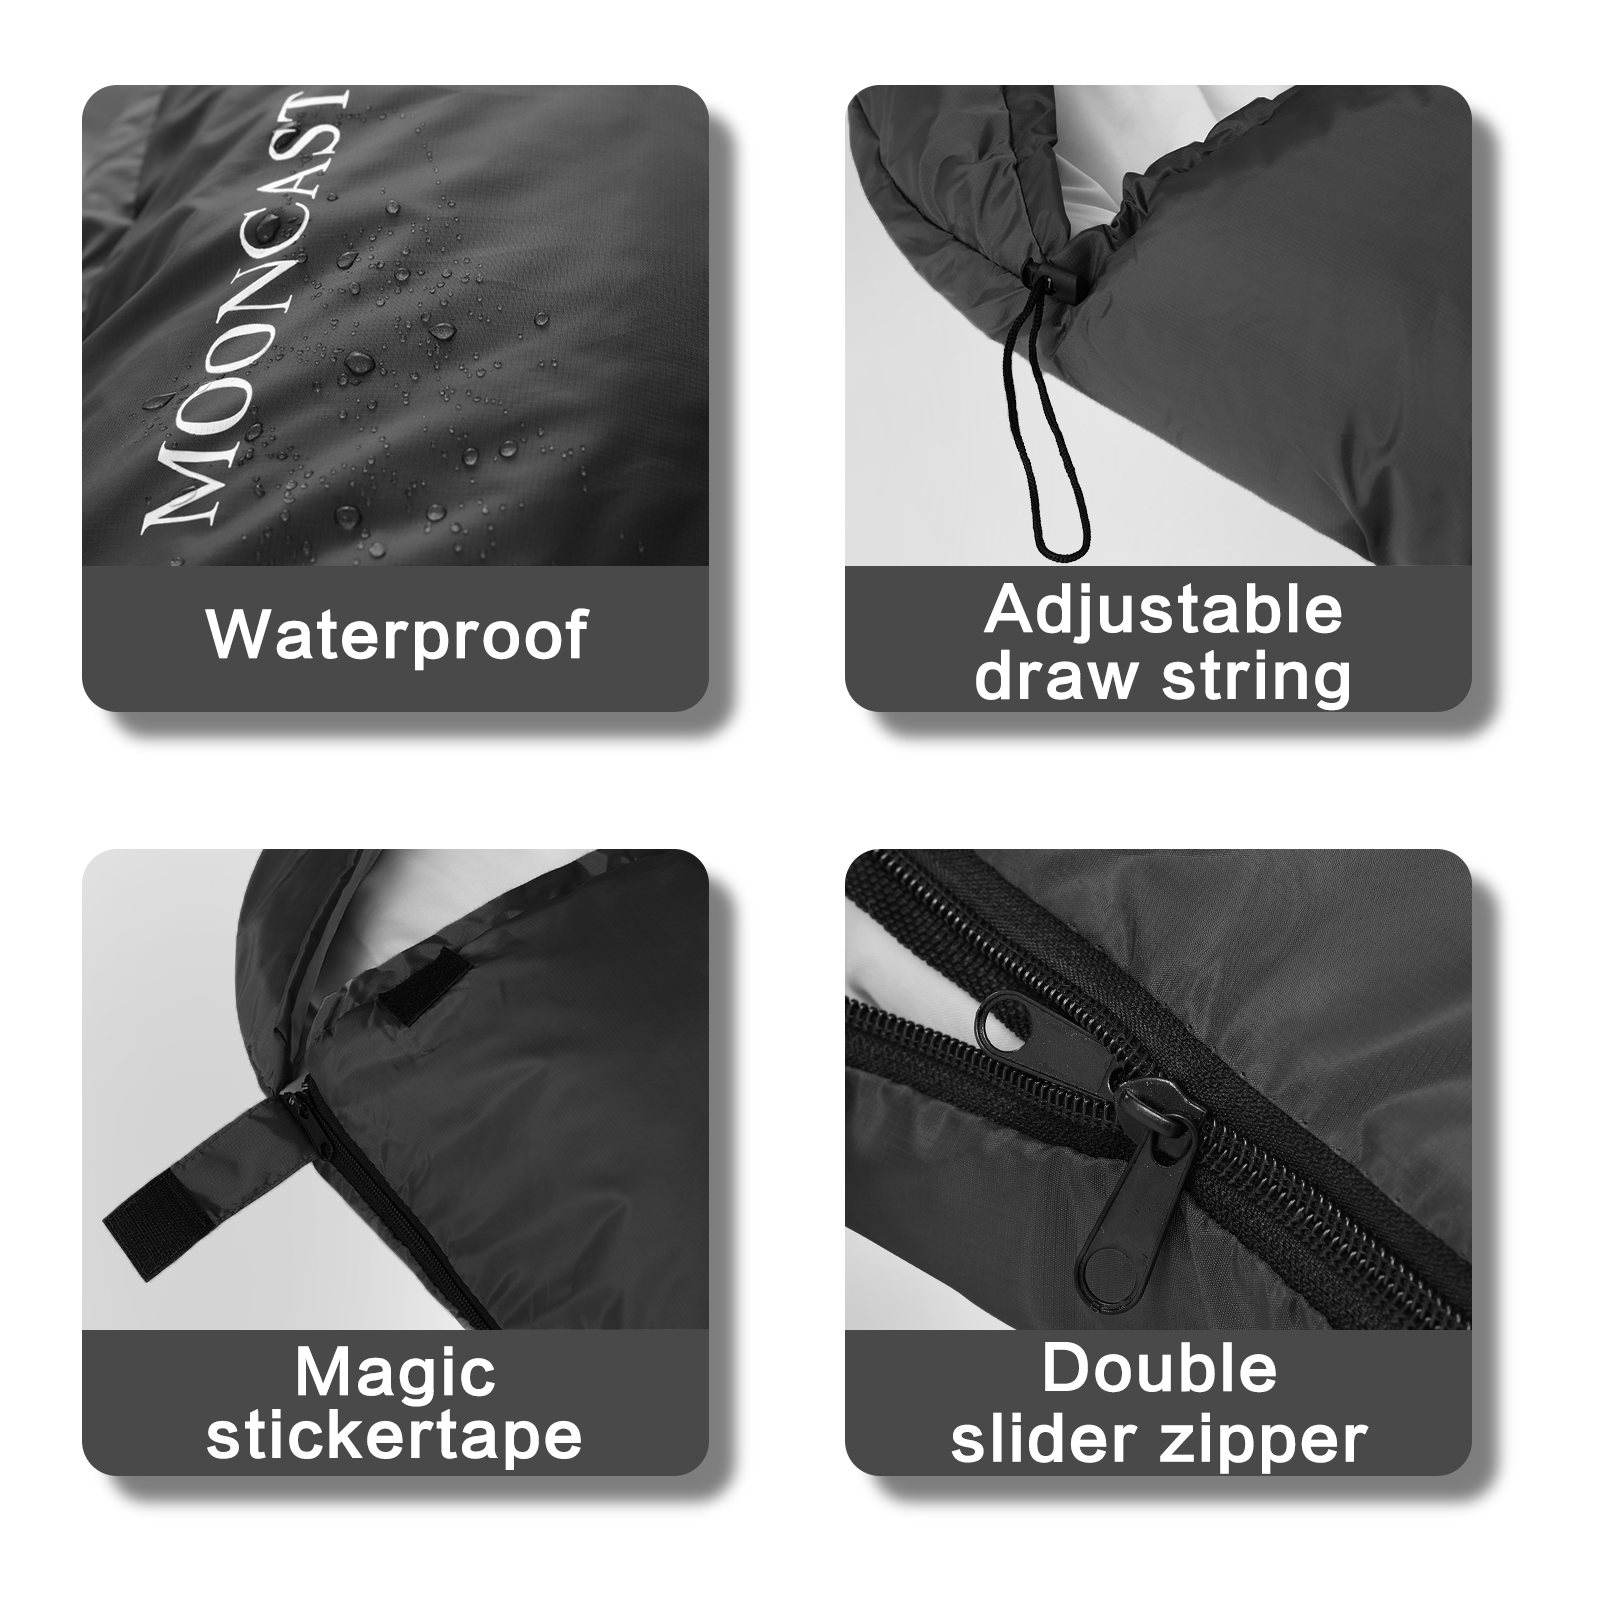 MOONCAST 0 ºC Sleeping Bags, Compression Sack Portable and Lightweight for Camping, Dark Gray - image 2 of 6